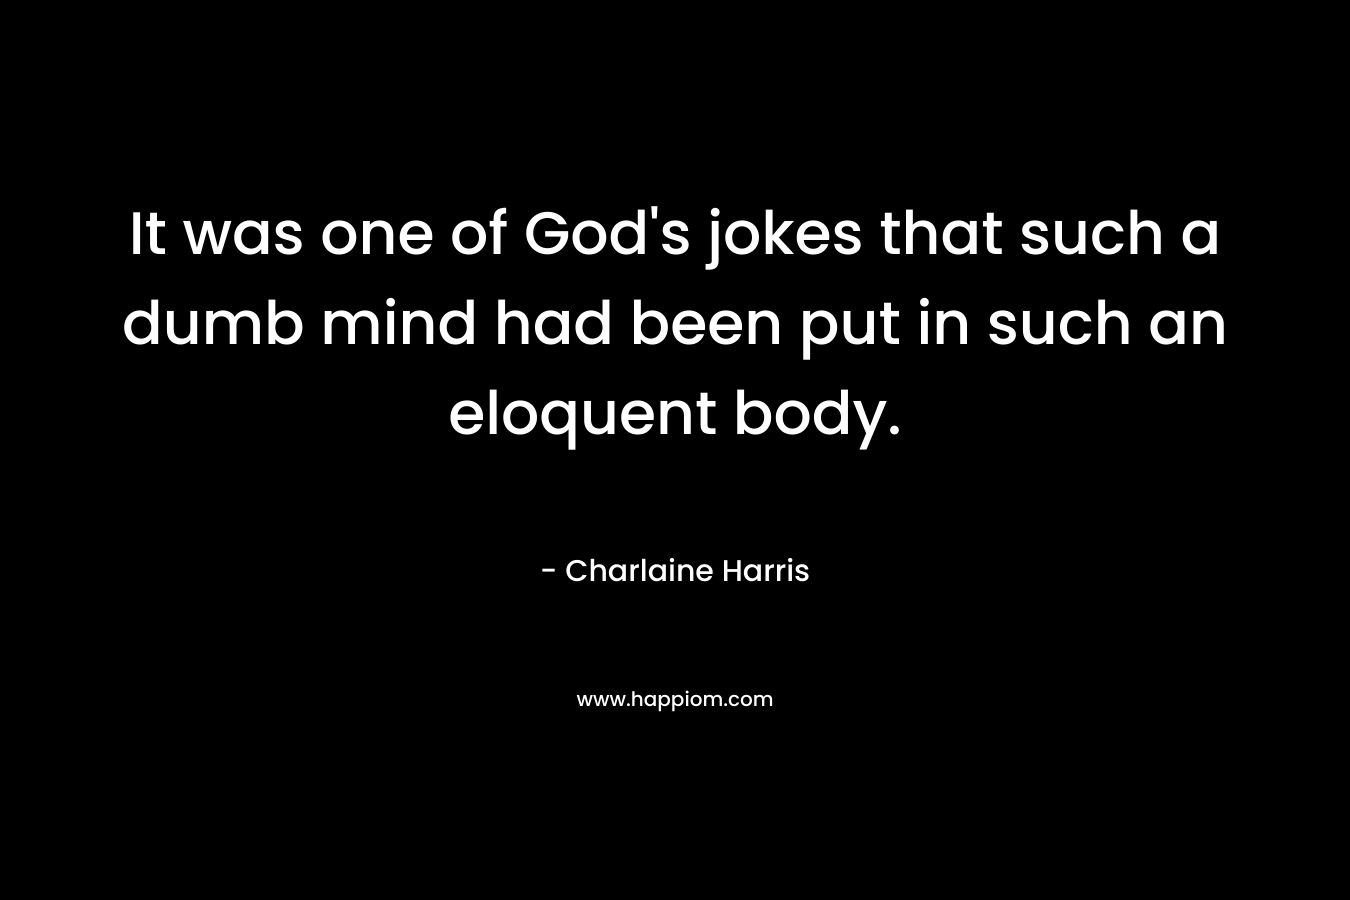 It was one of God's jokes that such a dumb mind had been put in such an eloquent body.